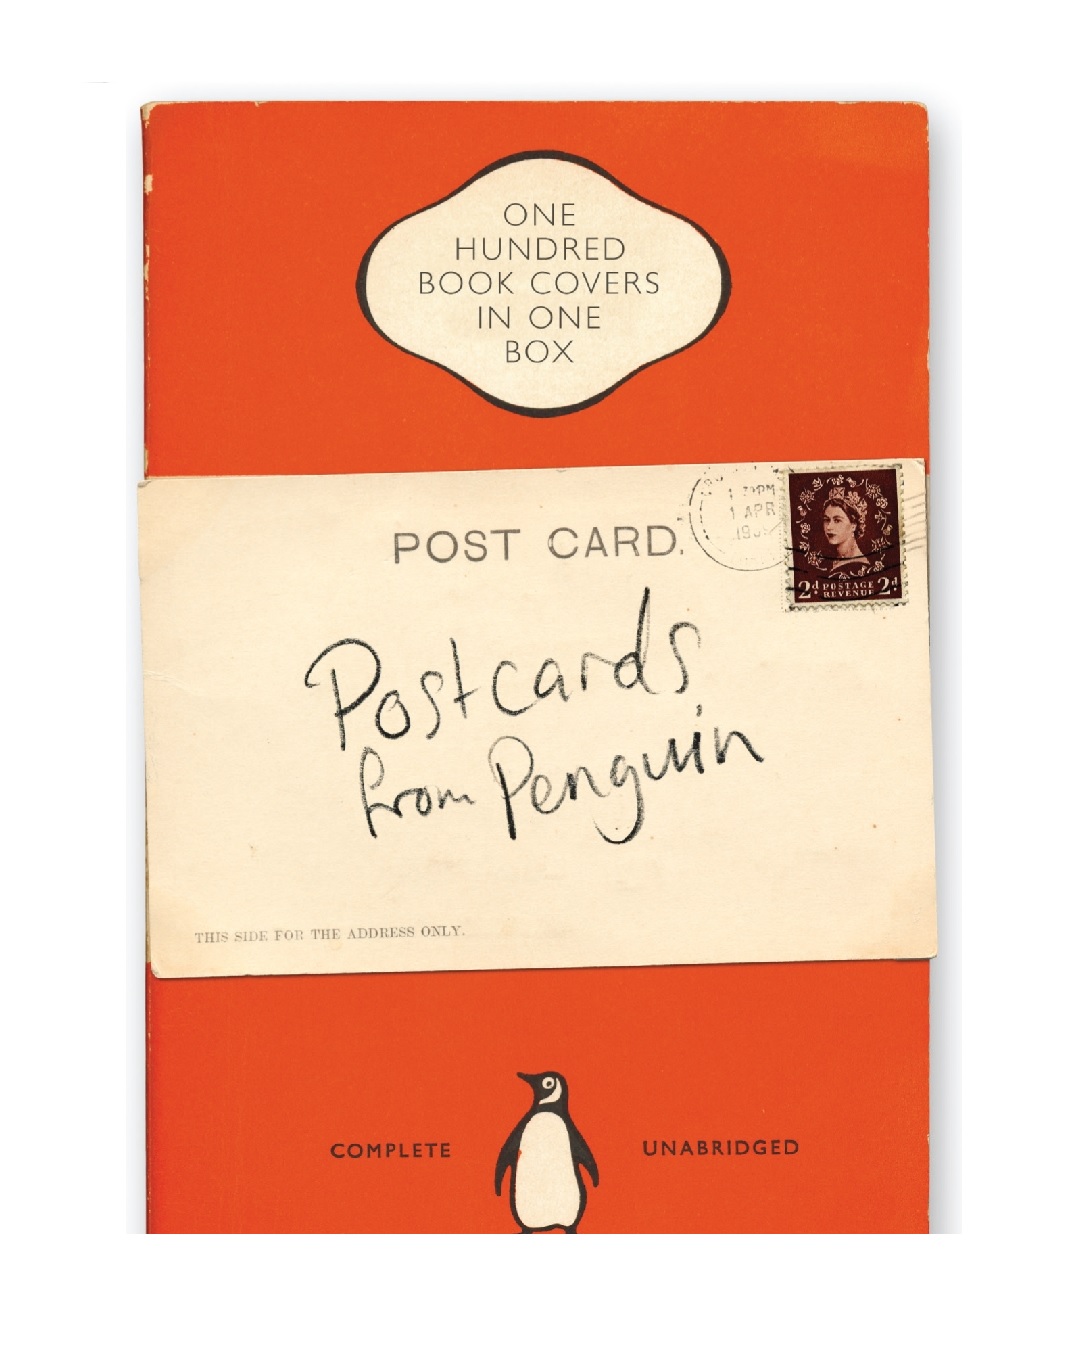 Postcards from penguin